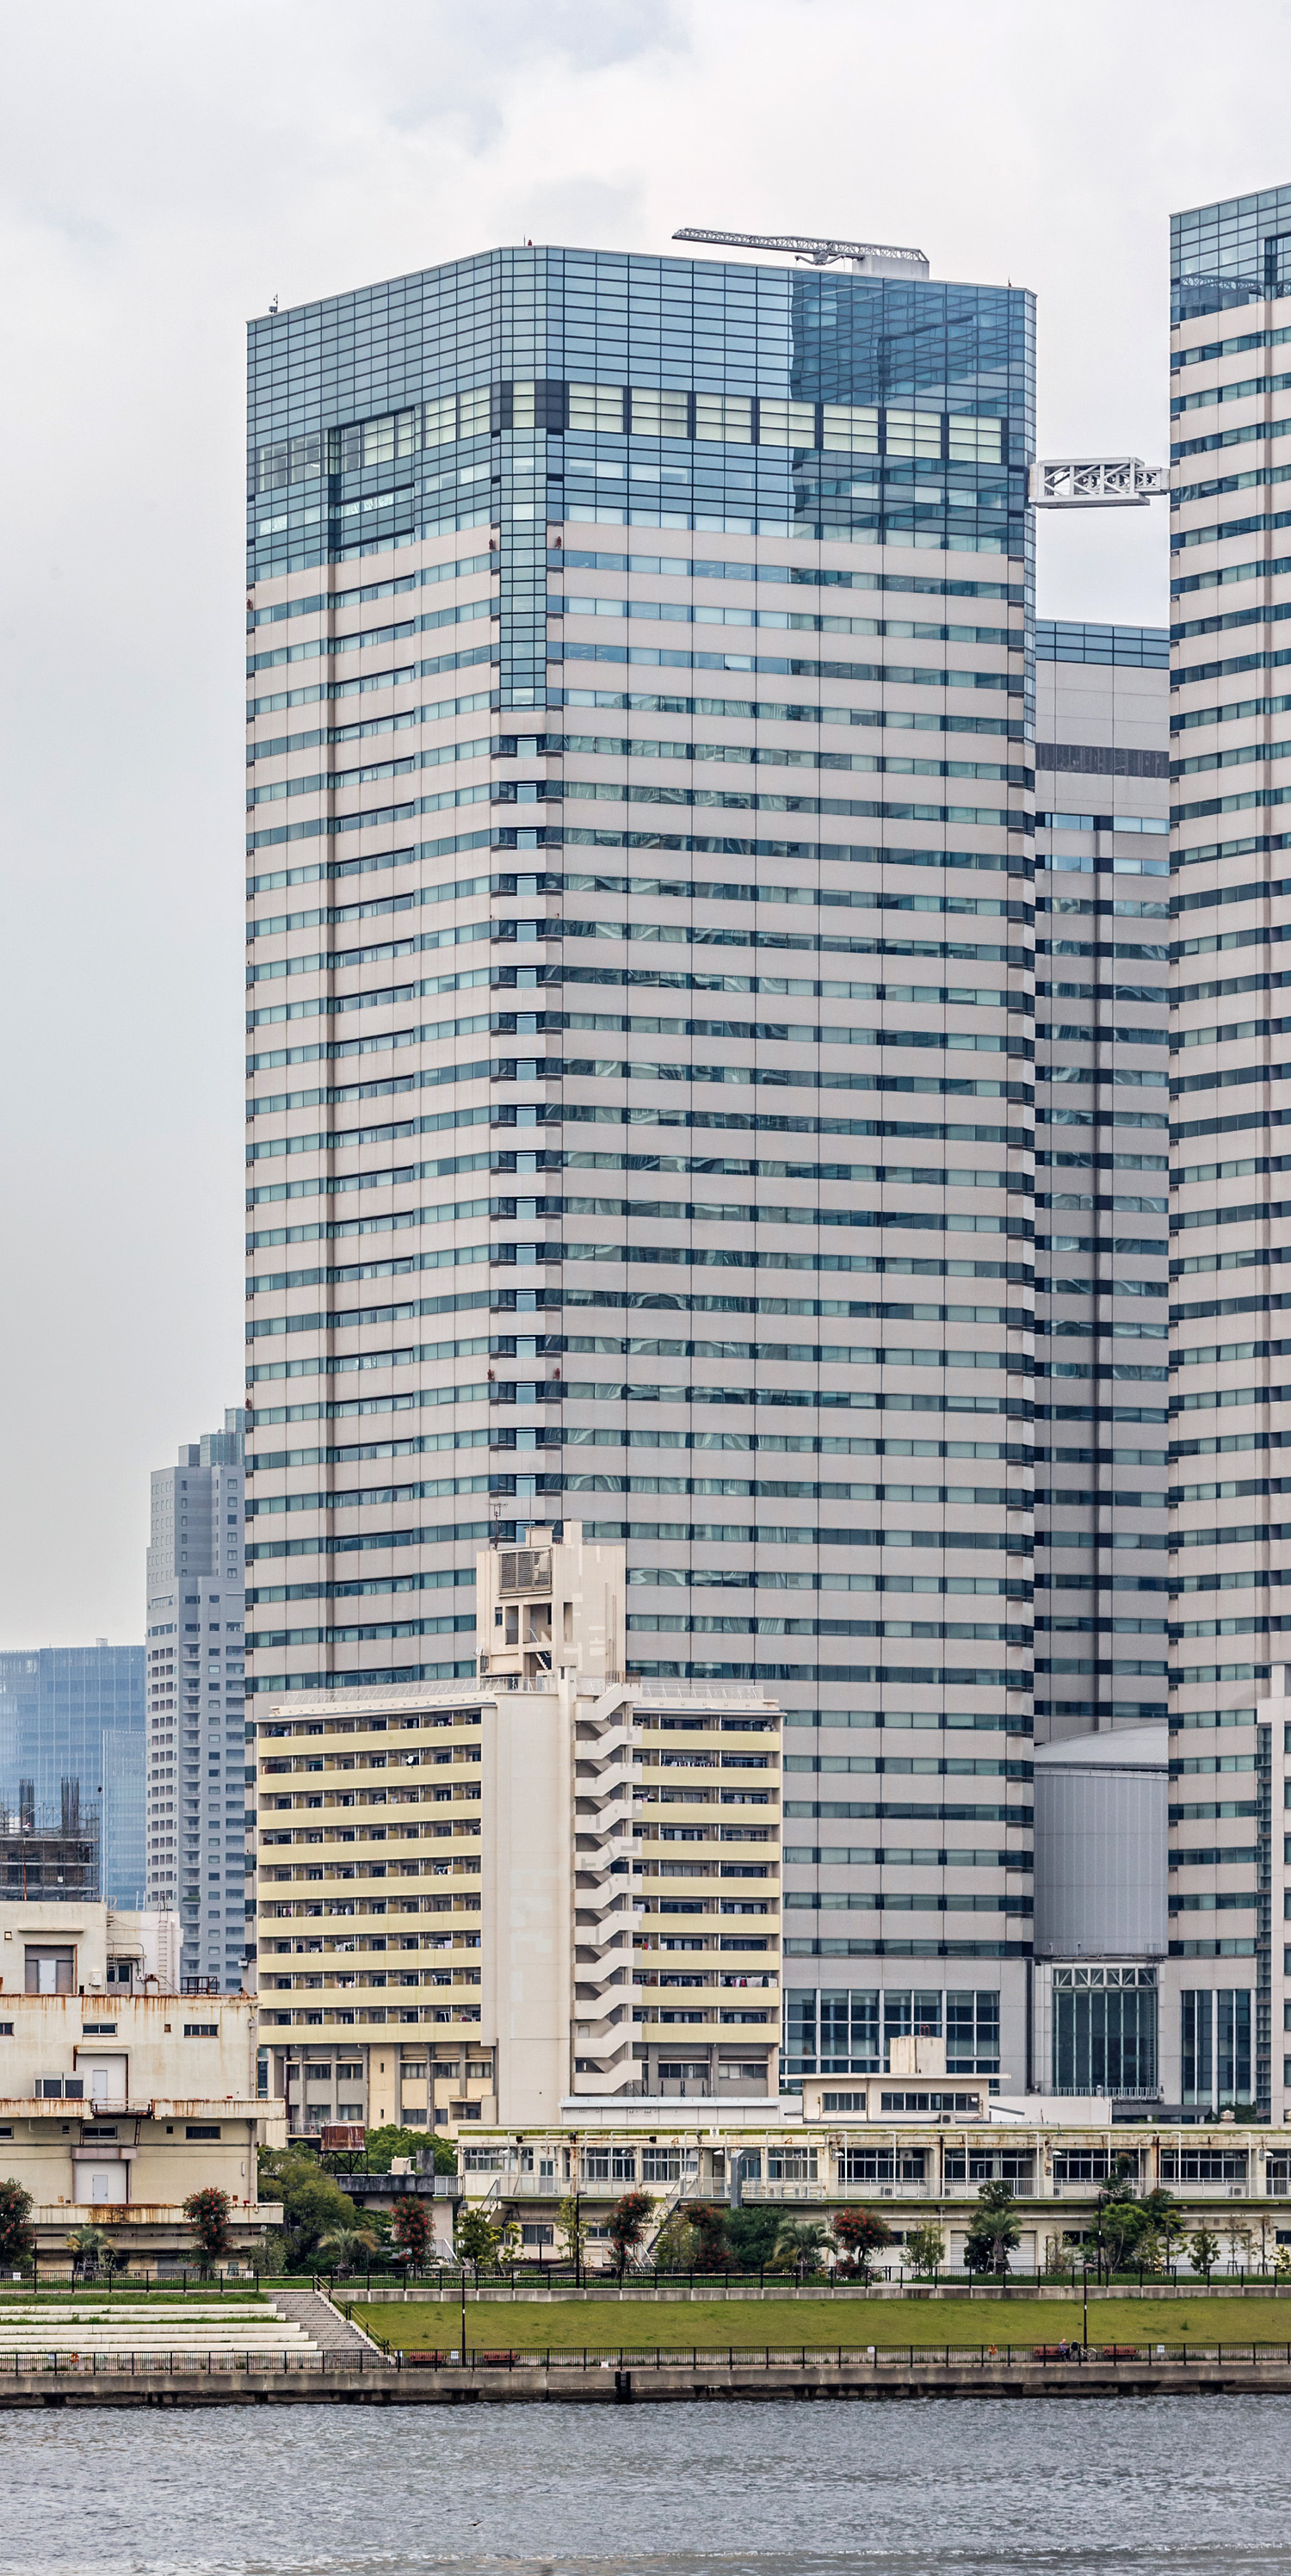 Harumi Island Triton Square Tower Y, Tokyo - View from the south. © Mathias Beinling